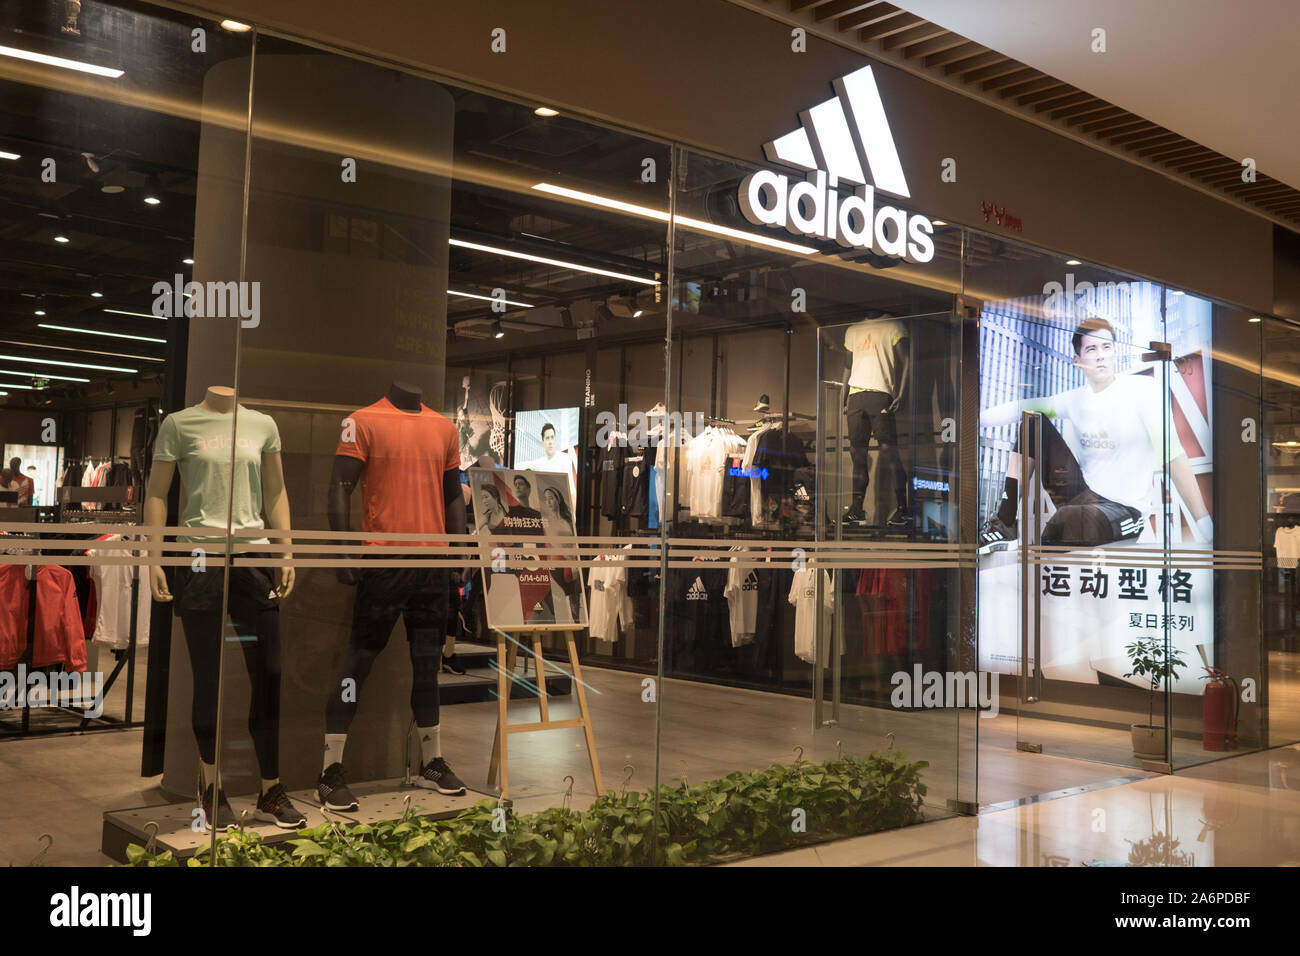 ADIDAS in China: Shop facade during a special sale, This Famous German  brand makes popular sports clothing, China 17 june 2019 Stock Photo - Alamy